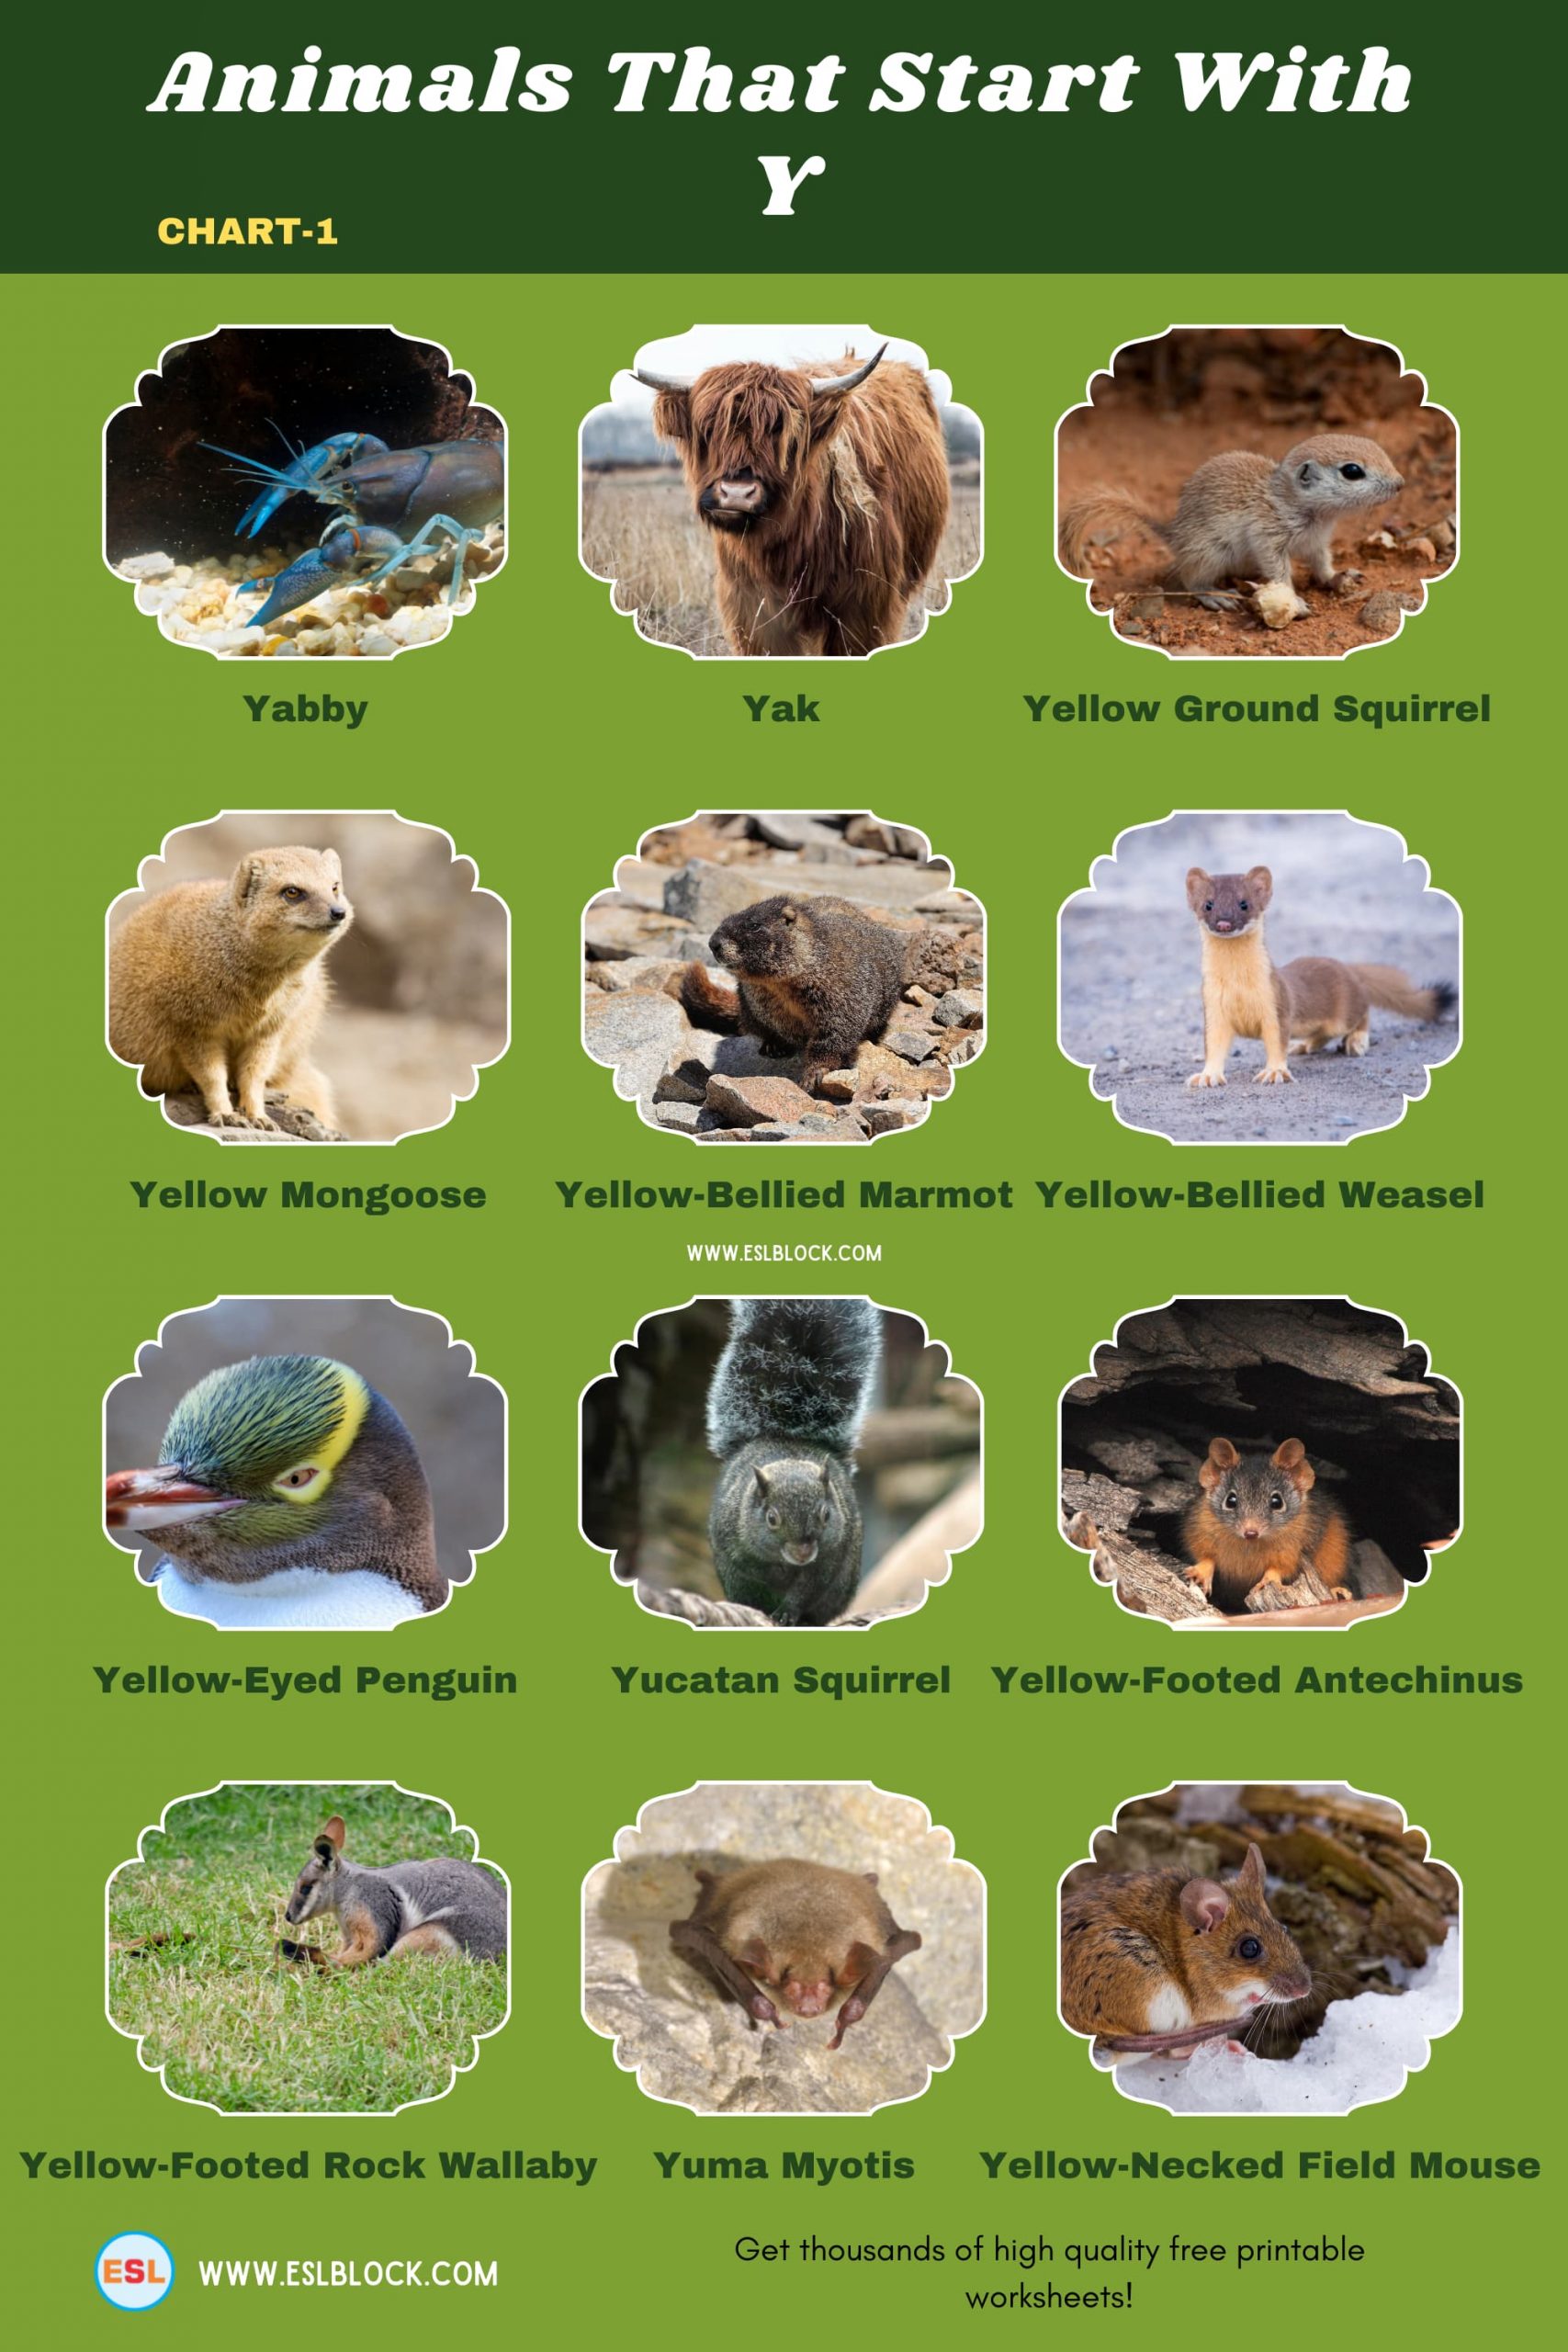 5 Letter Animals Starting With Y, Animals List, Animals Names, Animals That Begins With Y, Animals That Start With Y, English, English Nouns, English Vocabulary, English Words, List of Animals That Start With Y, Nouns, Vocabulary, Y Animals, Y Animals in English, Y Animals Names